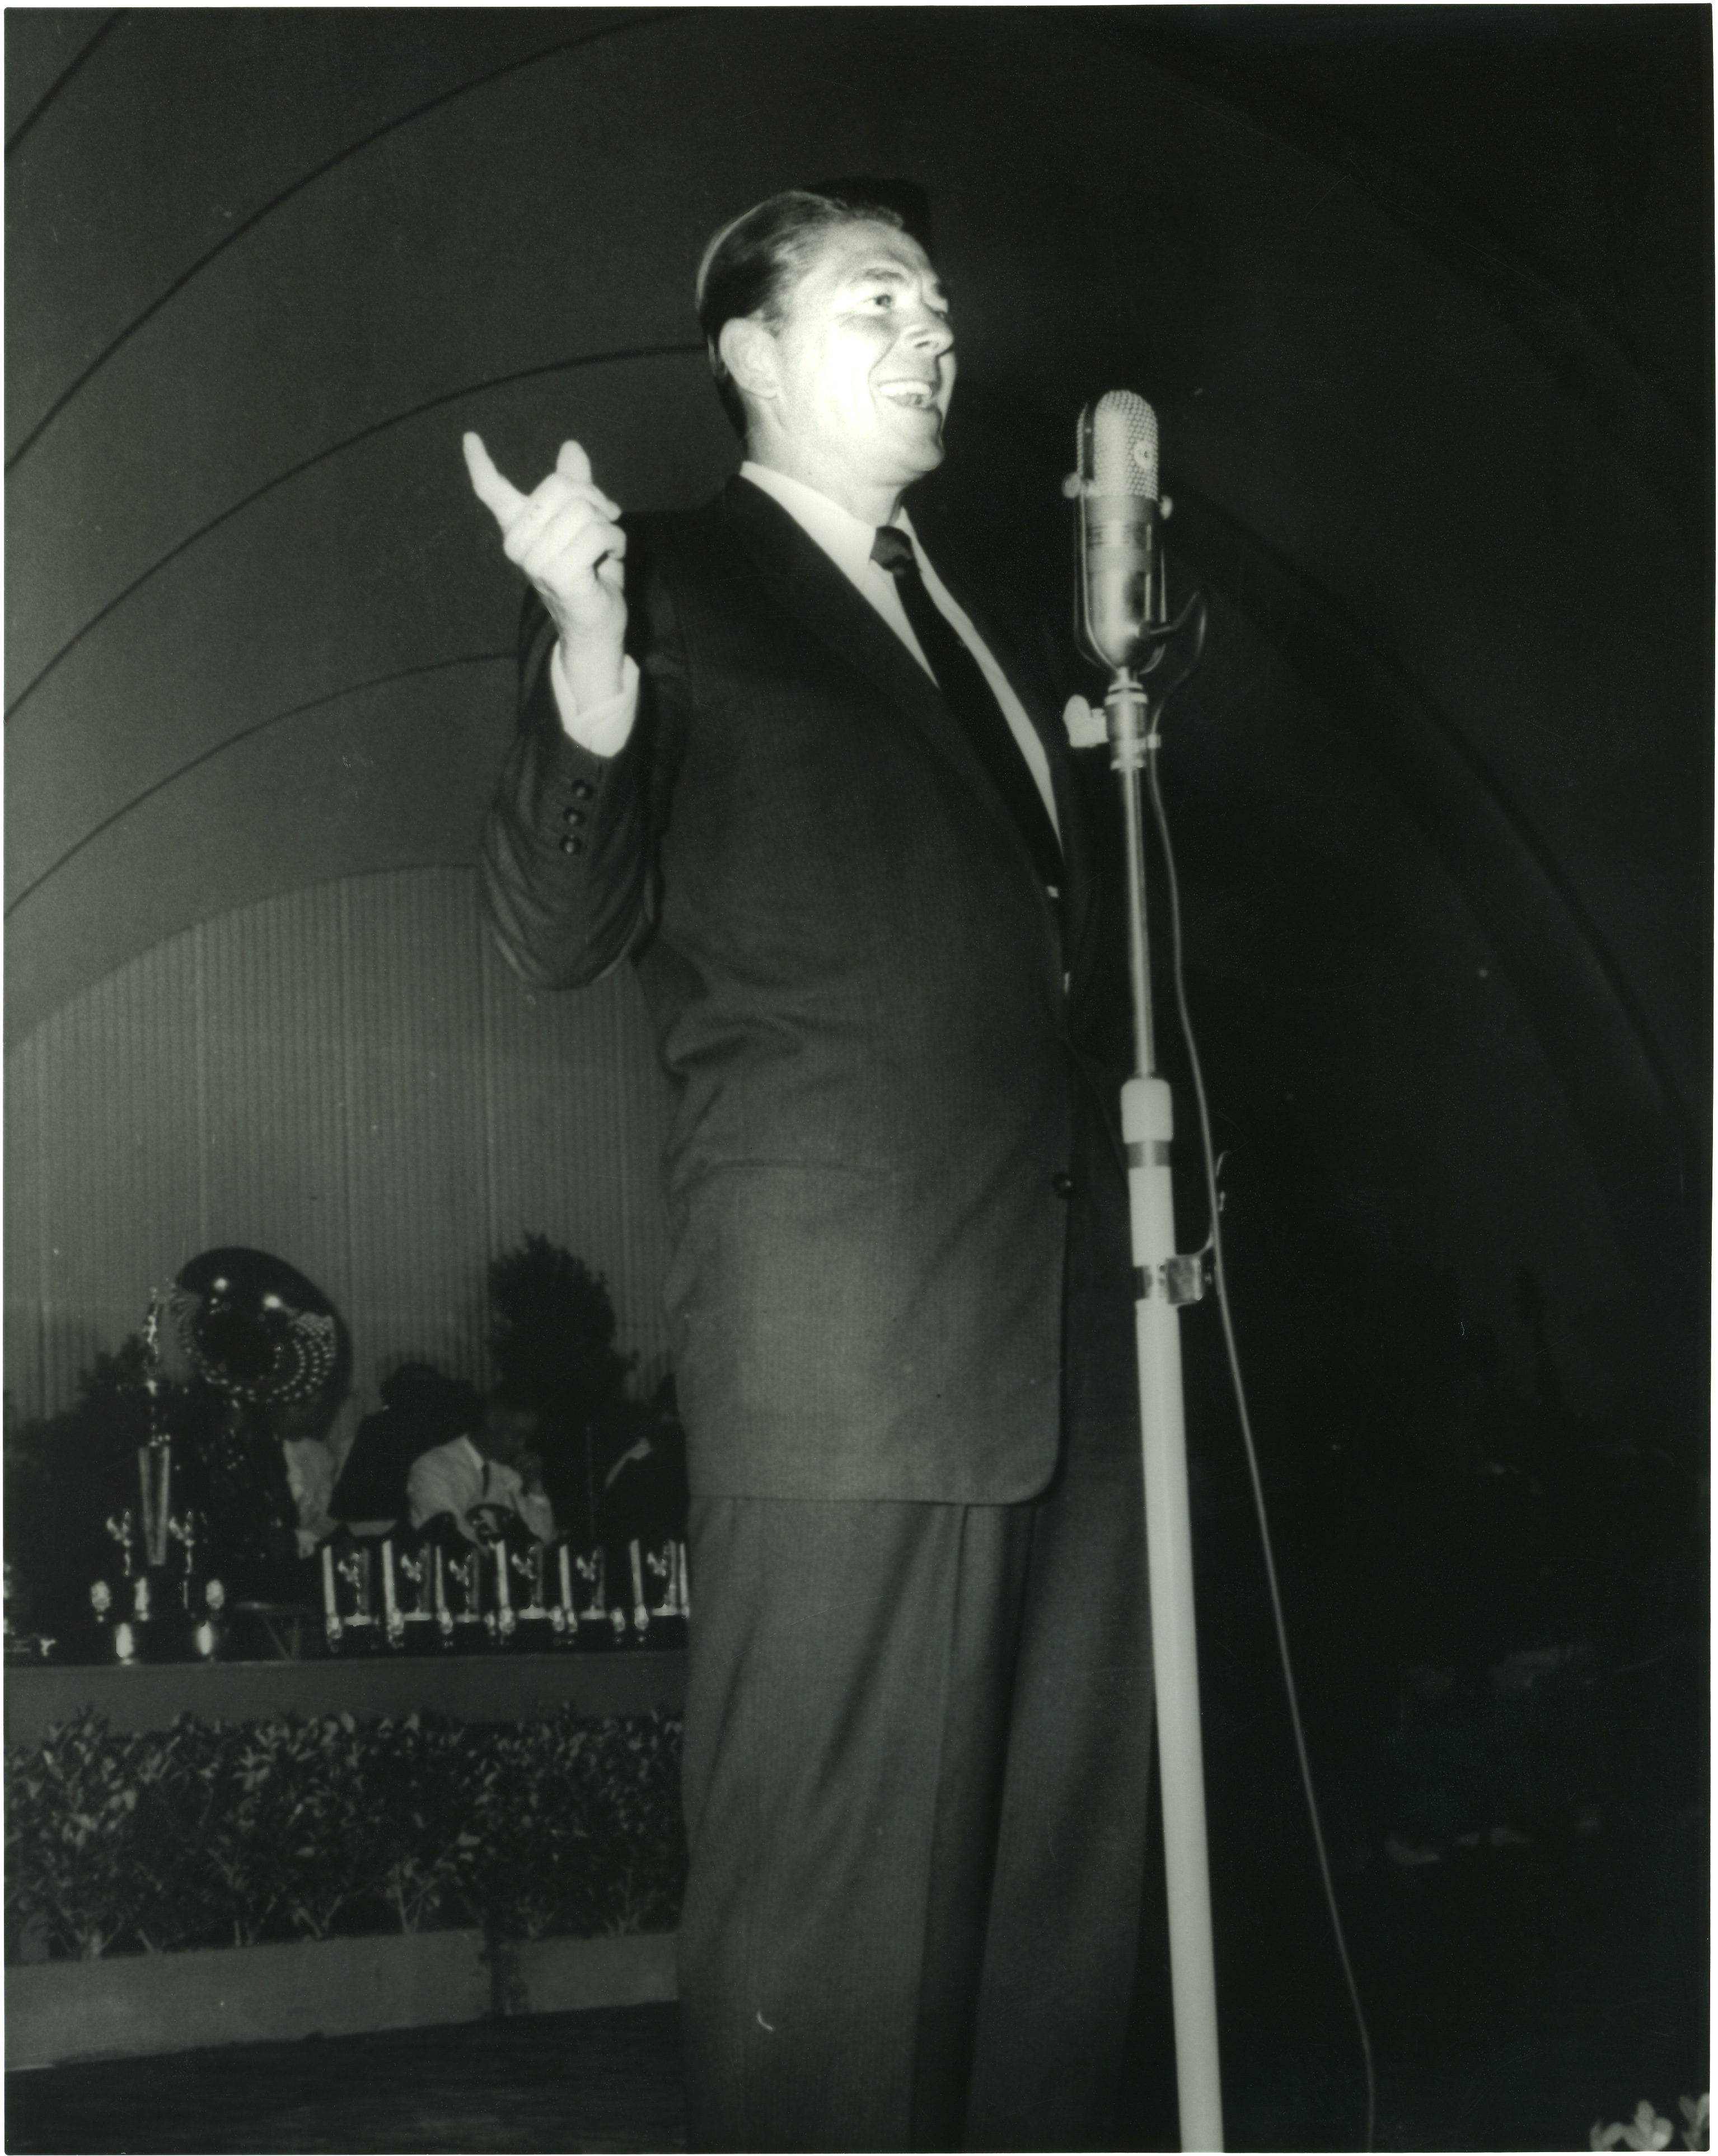 Ronald Reagan speaking at microphone, unknown event